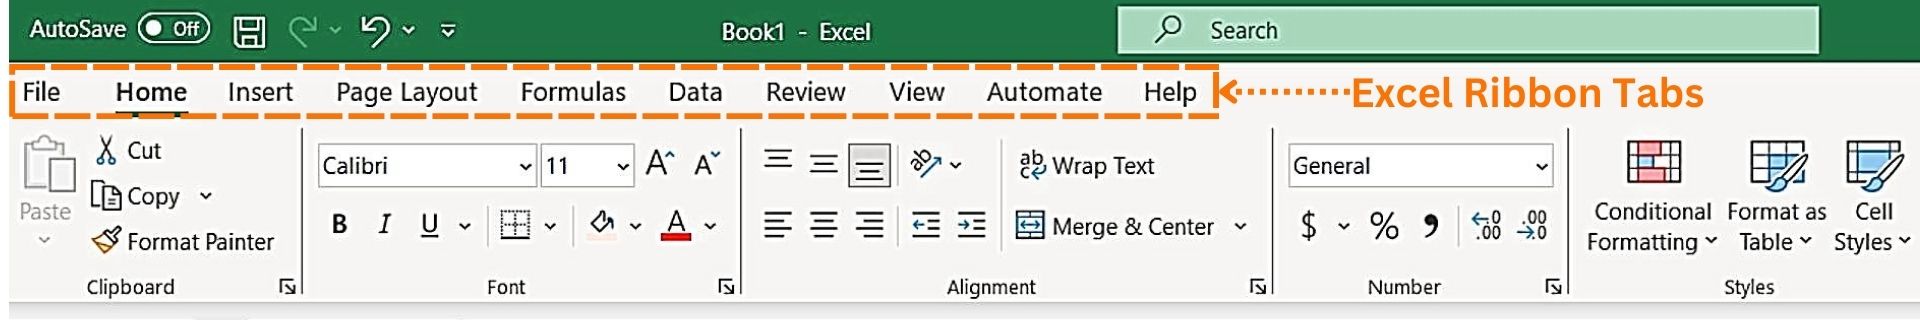 Excel Ribbon Tabs - Excel Hippo offers free Excel Courses for Beginners